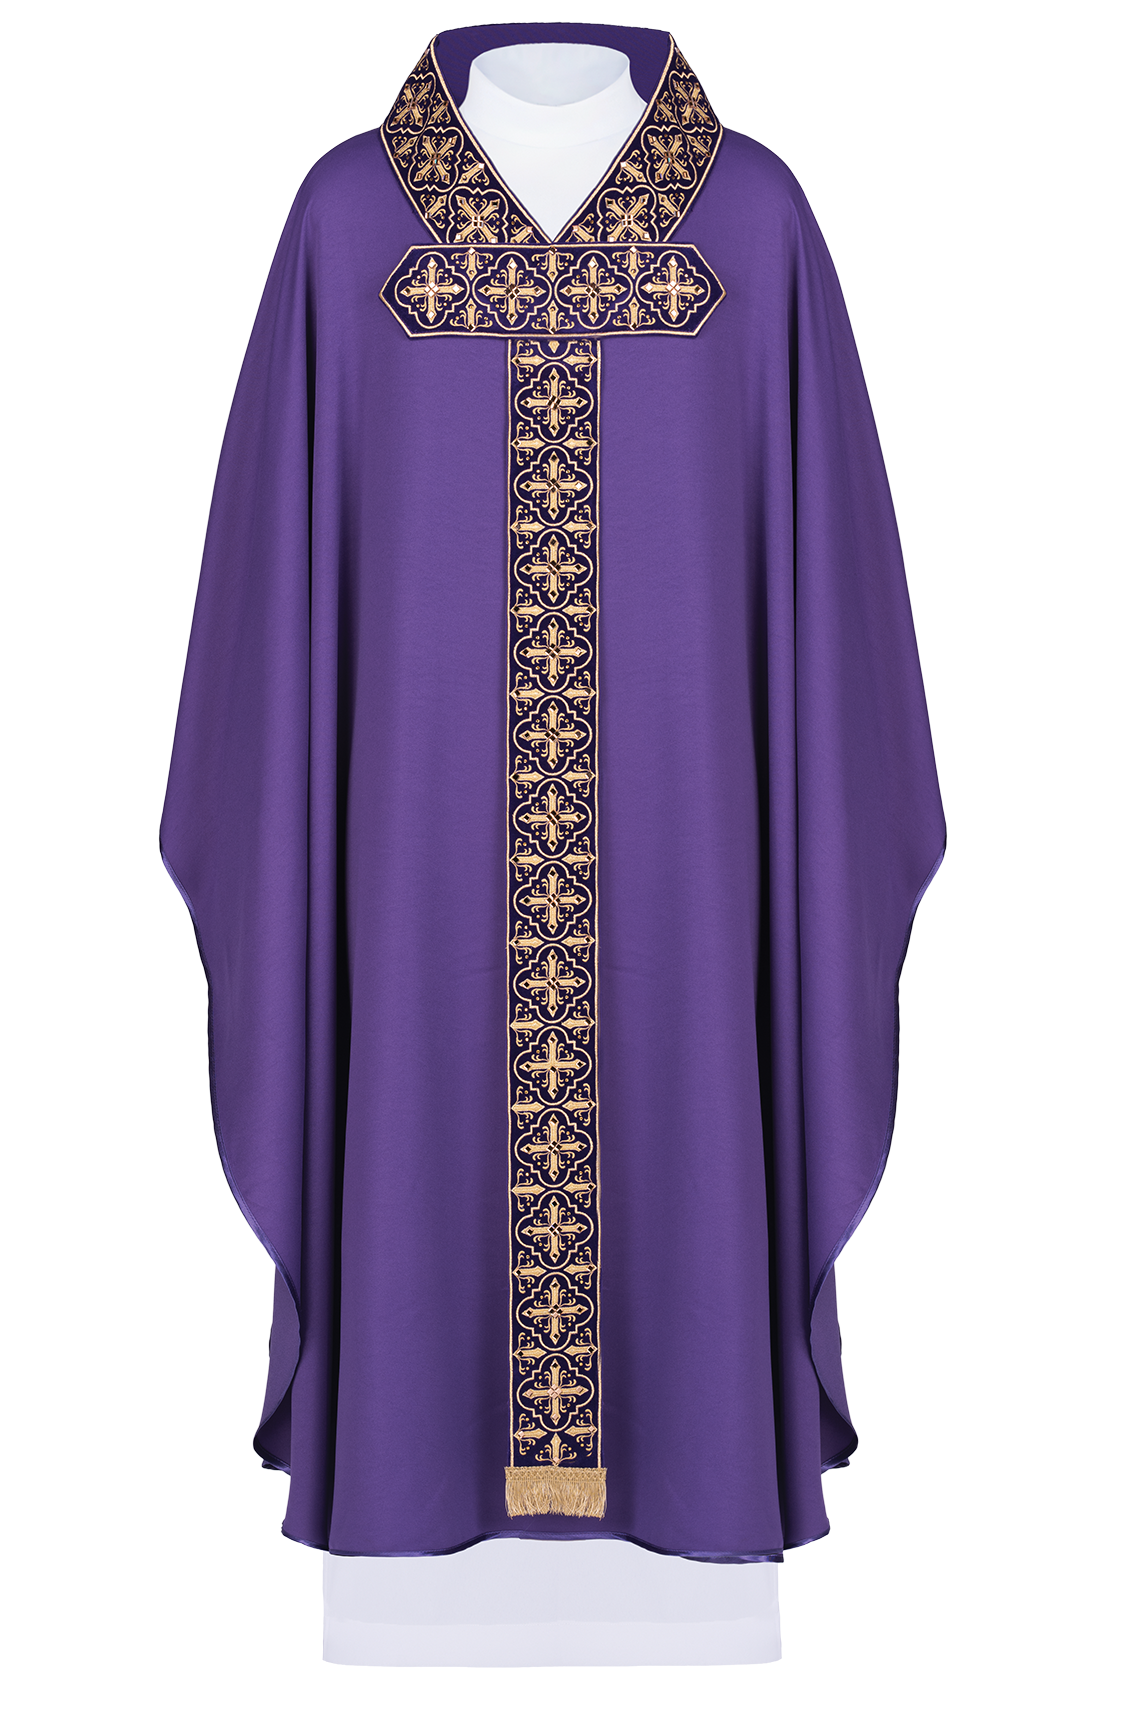 Purple chasuble decorated with five hundred decorative stones